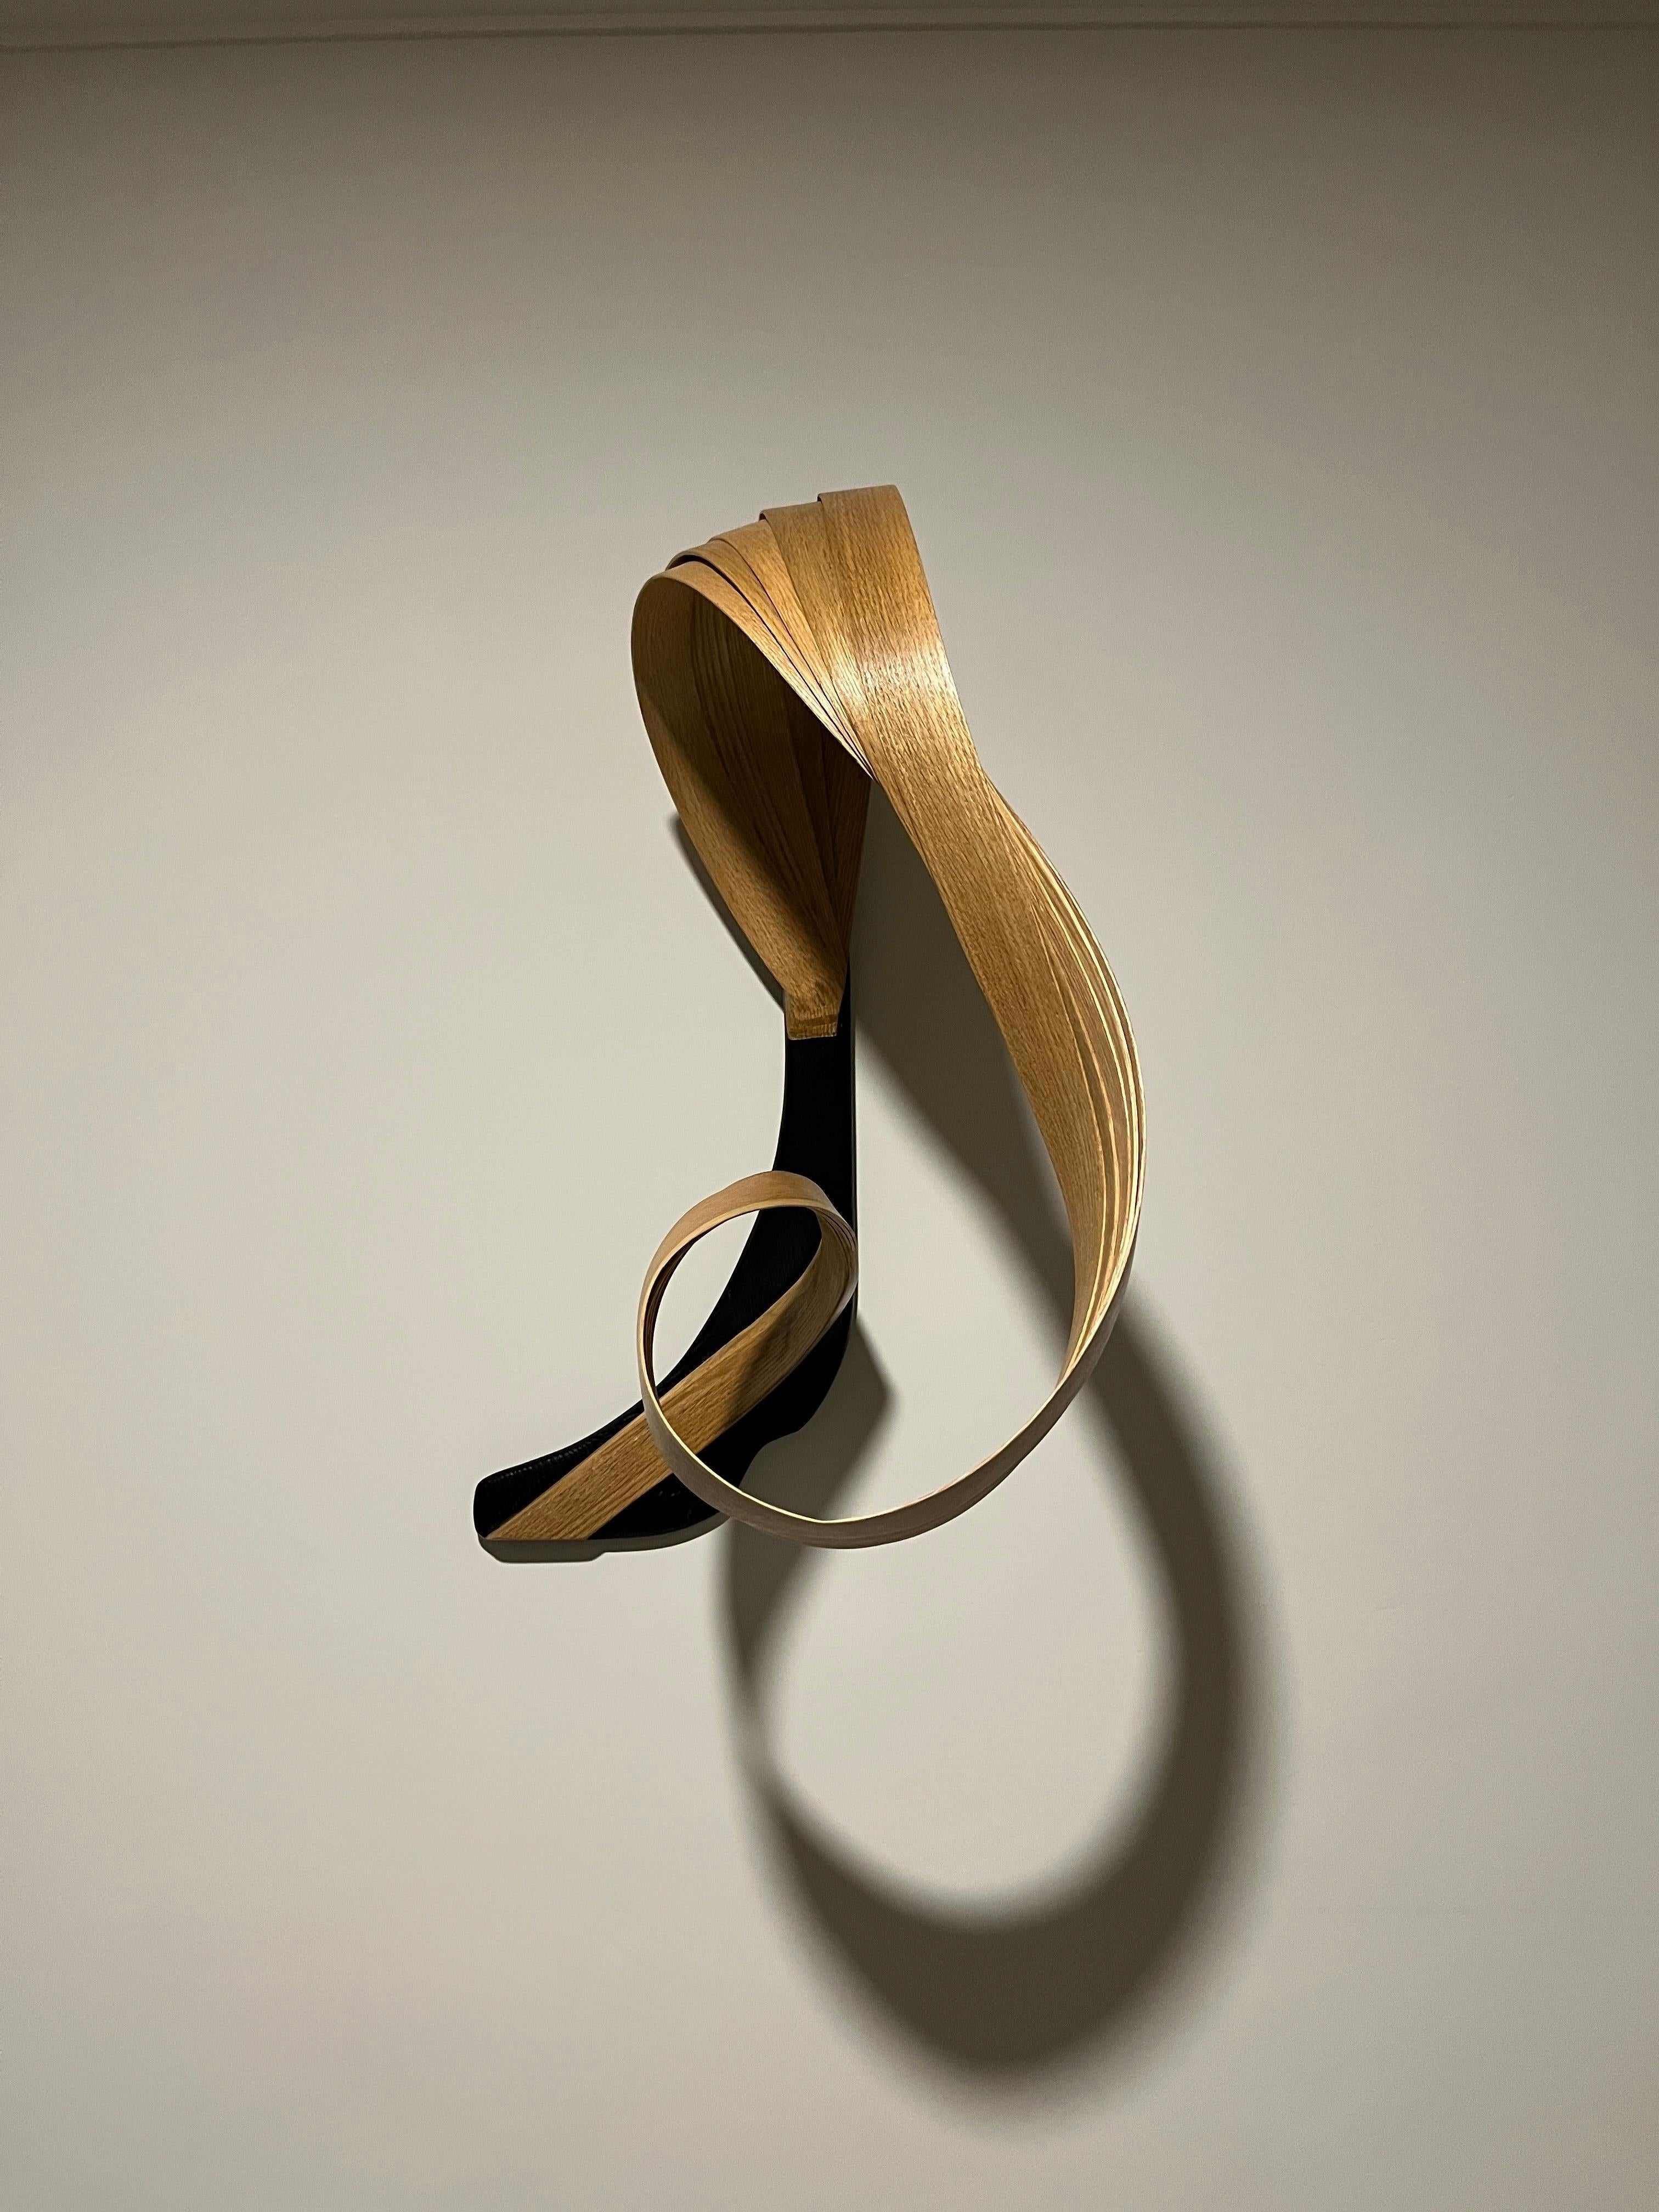 The sculpture is part of a limited series of sculptural works by Raka Studio which encapsulates the Studio’s working styles created using Ash wood.

The sculptures can be perceived to mimic various natural elements and forms because of the smooth